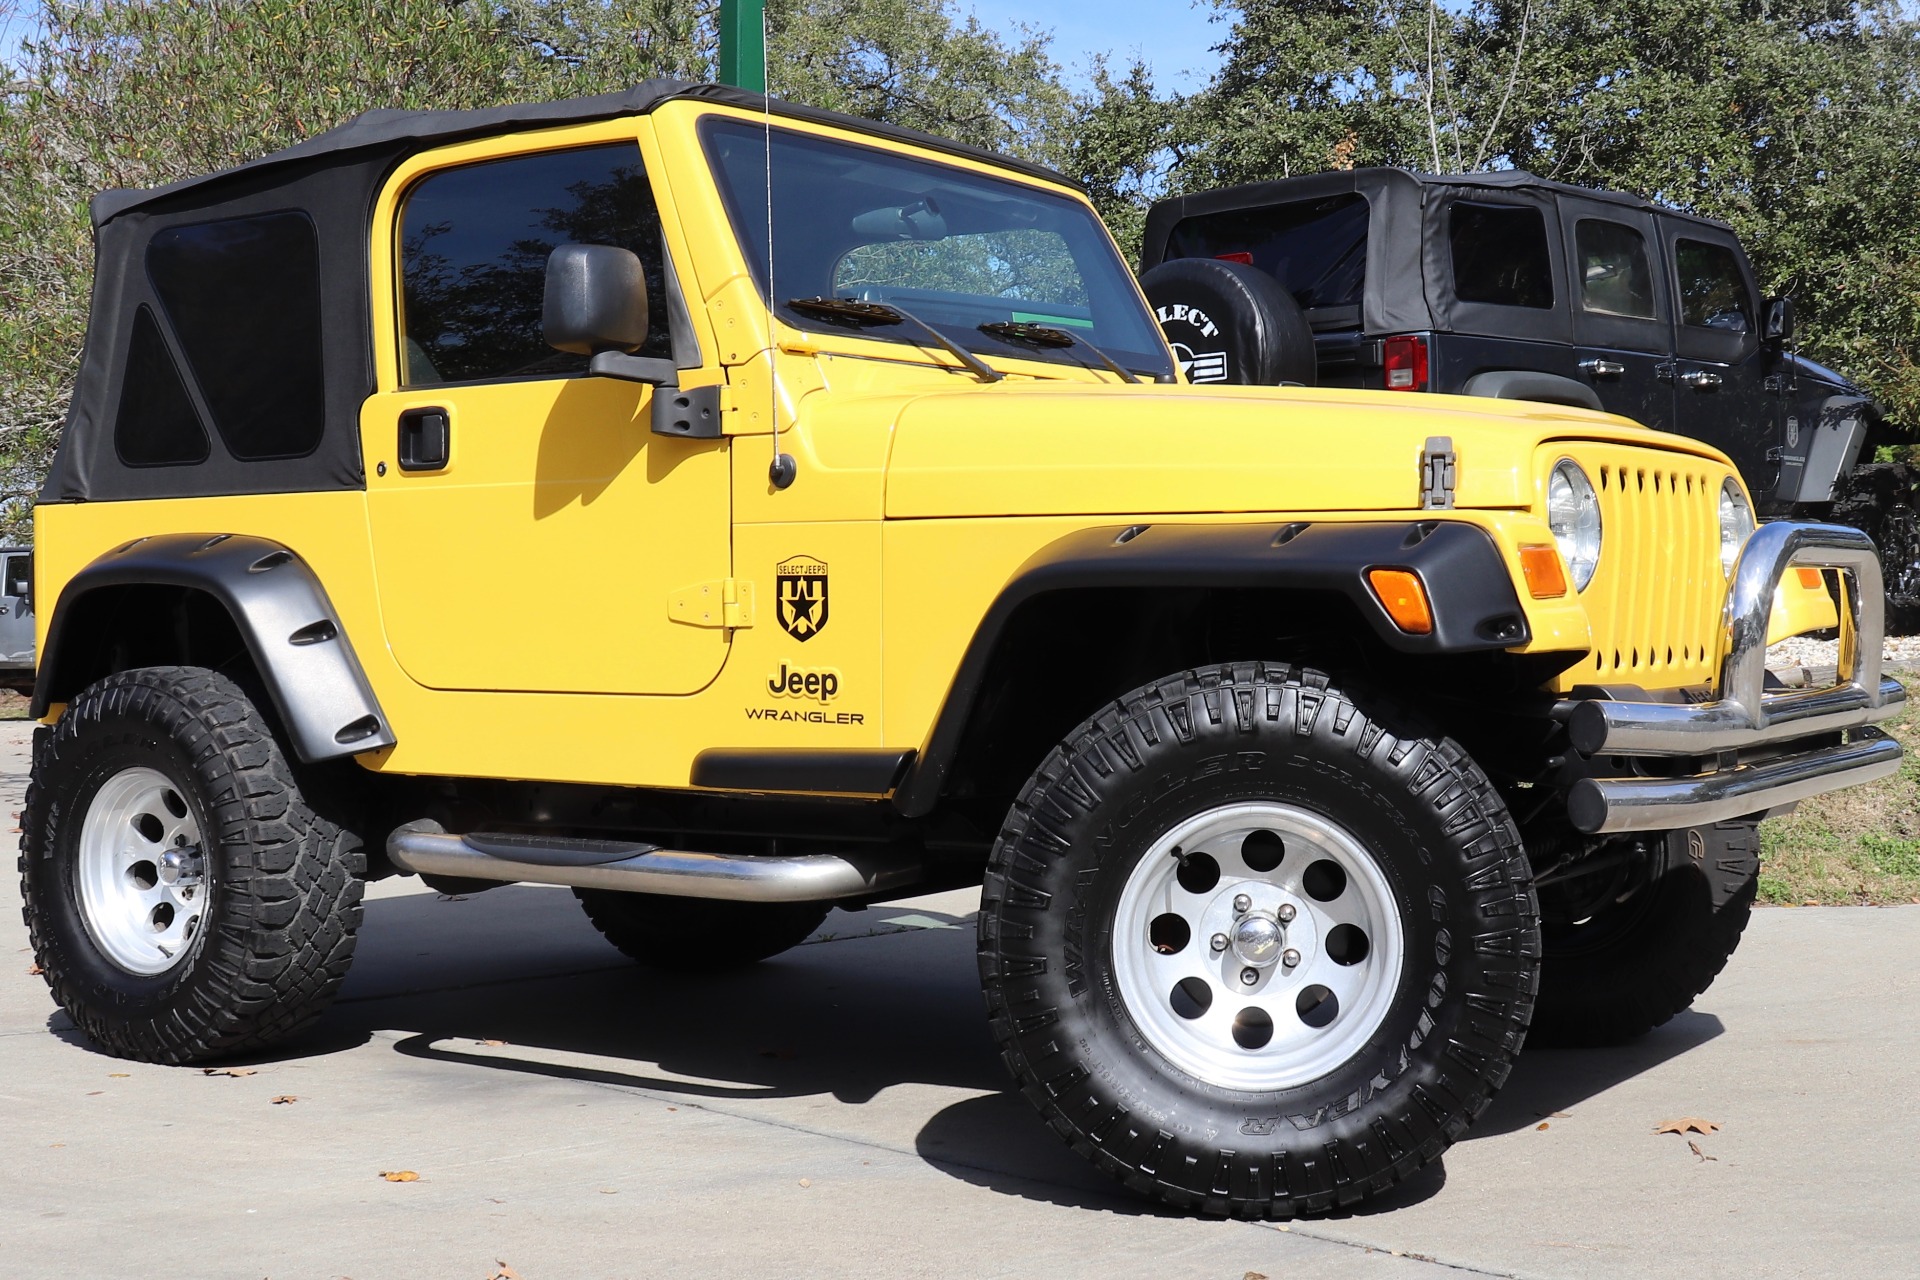 Used 2006 Jeep Wrangler X For Sale ($15,995) | Select Jeeps Inc. Stock  #703394